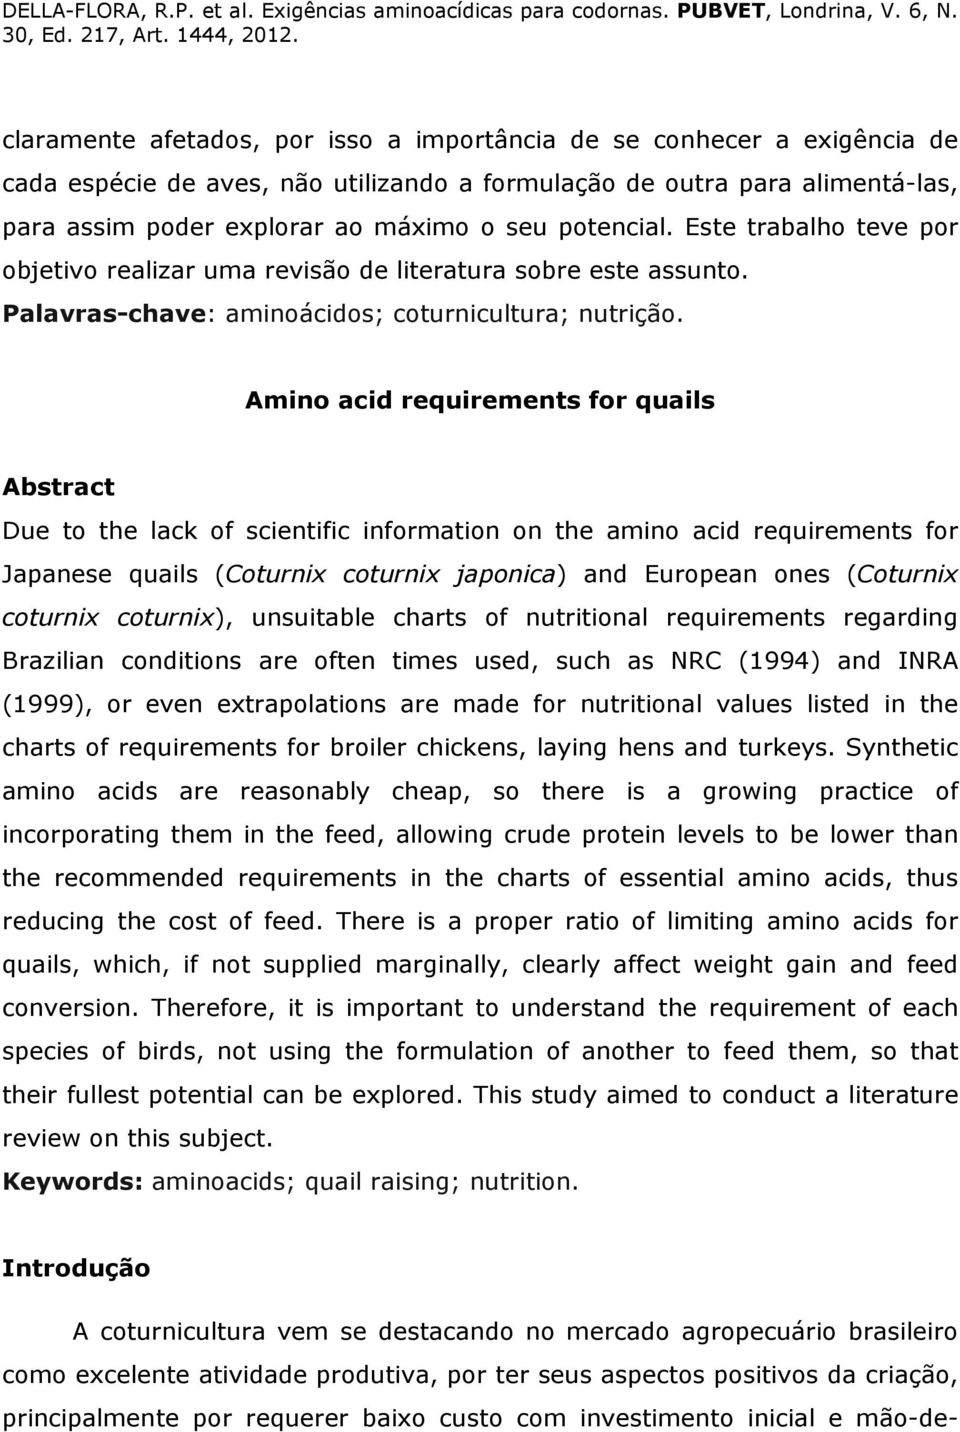 Amino acid requirements for quails Abstract Due to the lack of scientific information on the amino acid requirements for Japanese quails (Coturnix coturnix japonica) and European ones (Coturnix